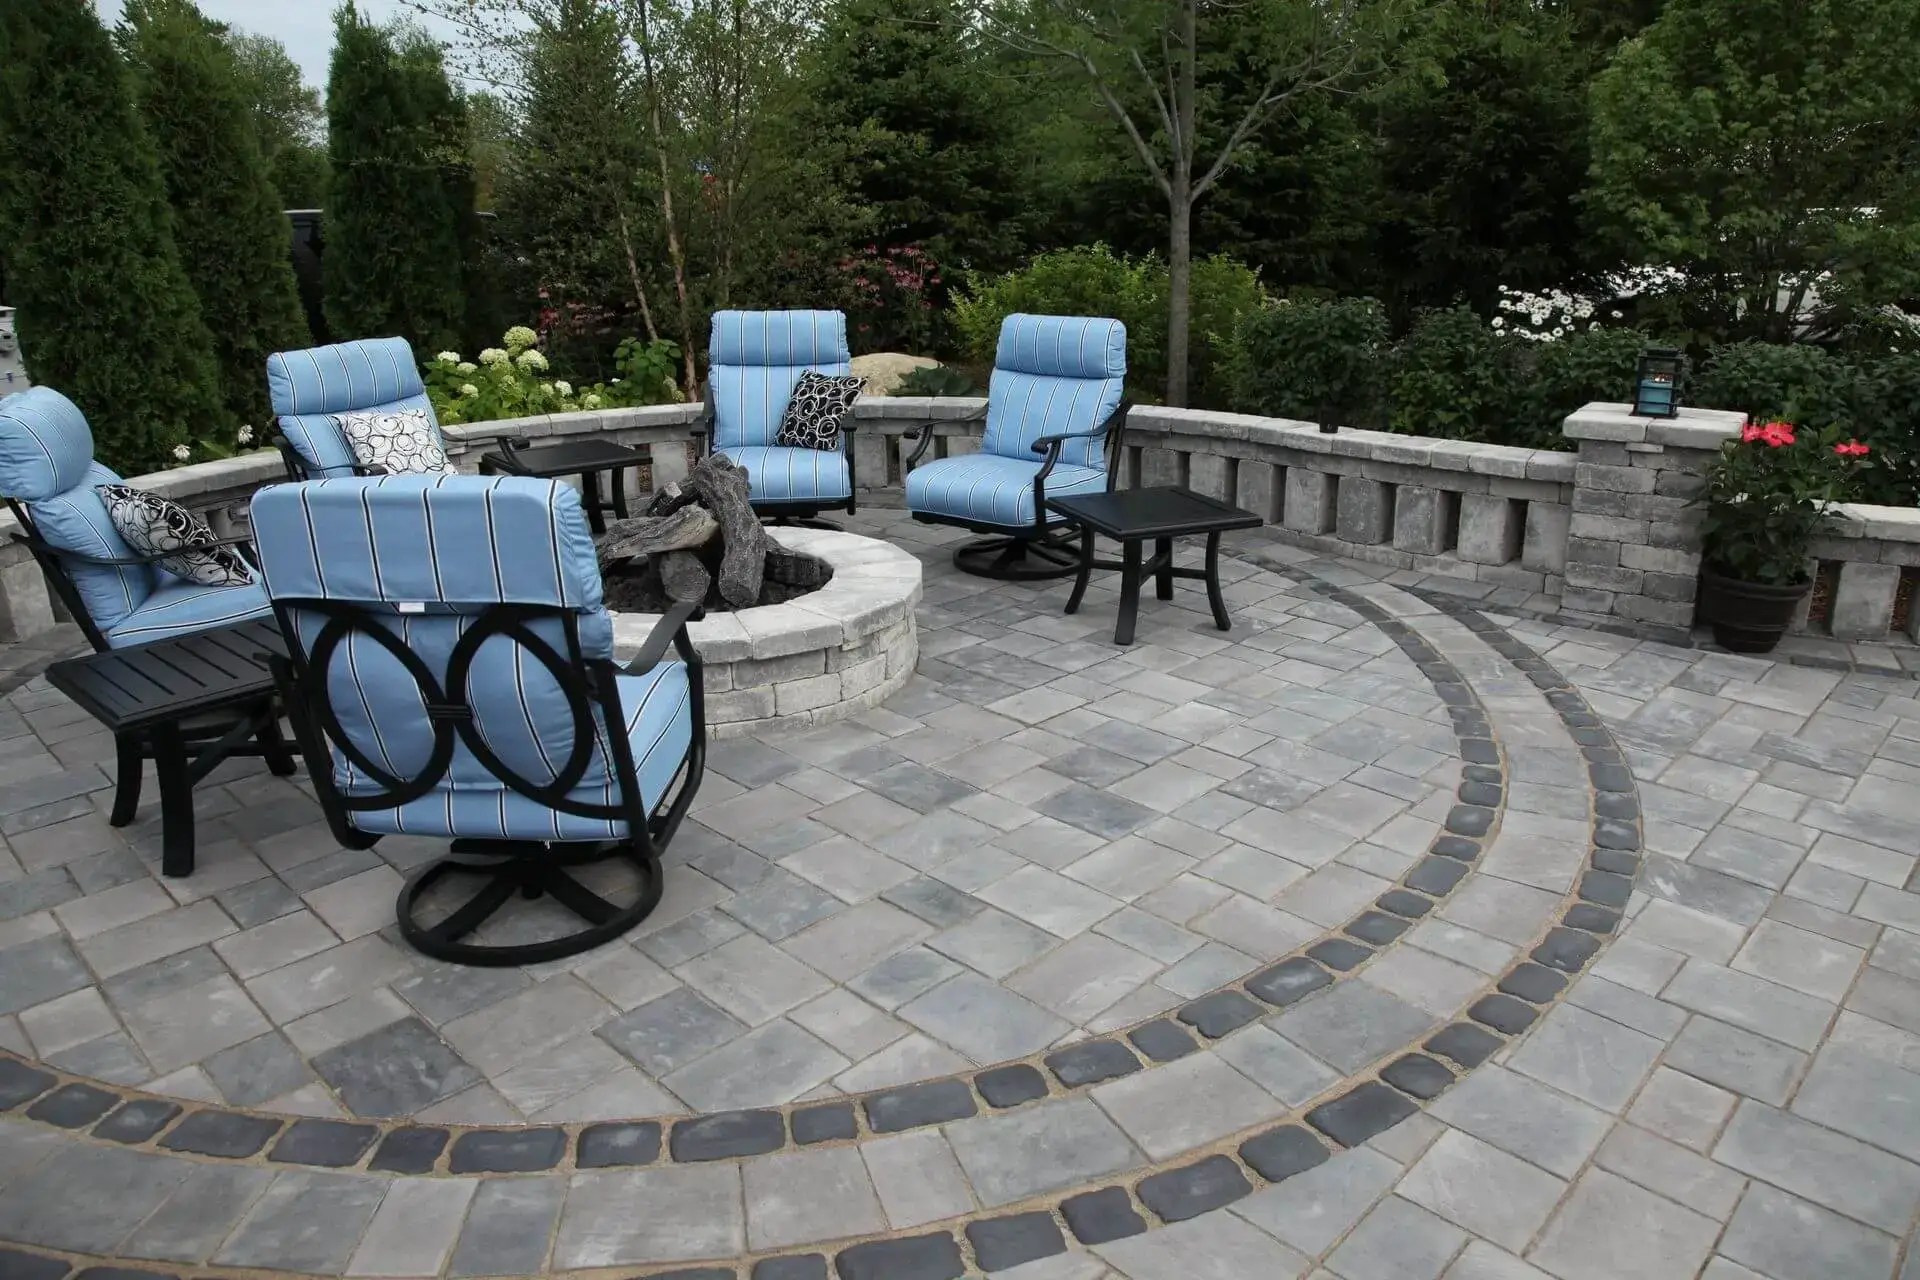 Chairs for relaxation at the outdoor space and backyard landscaping.